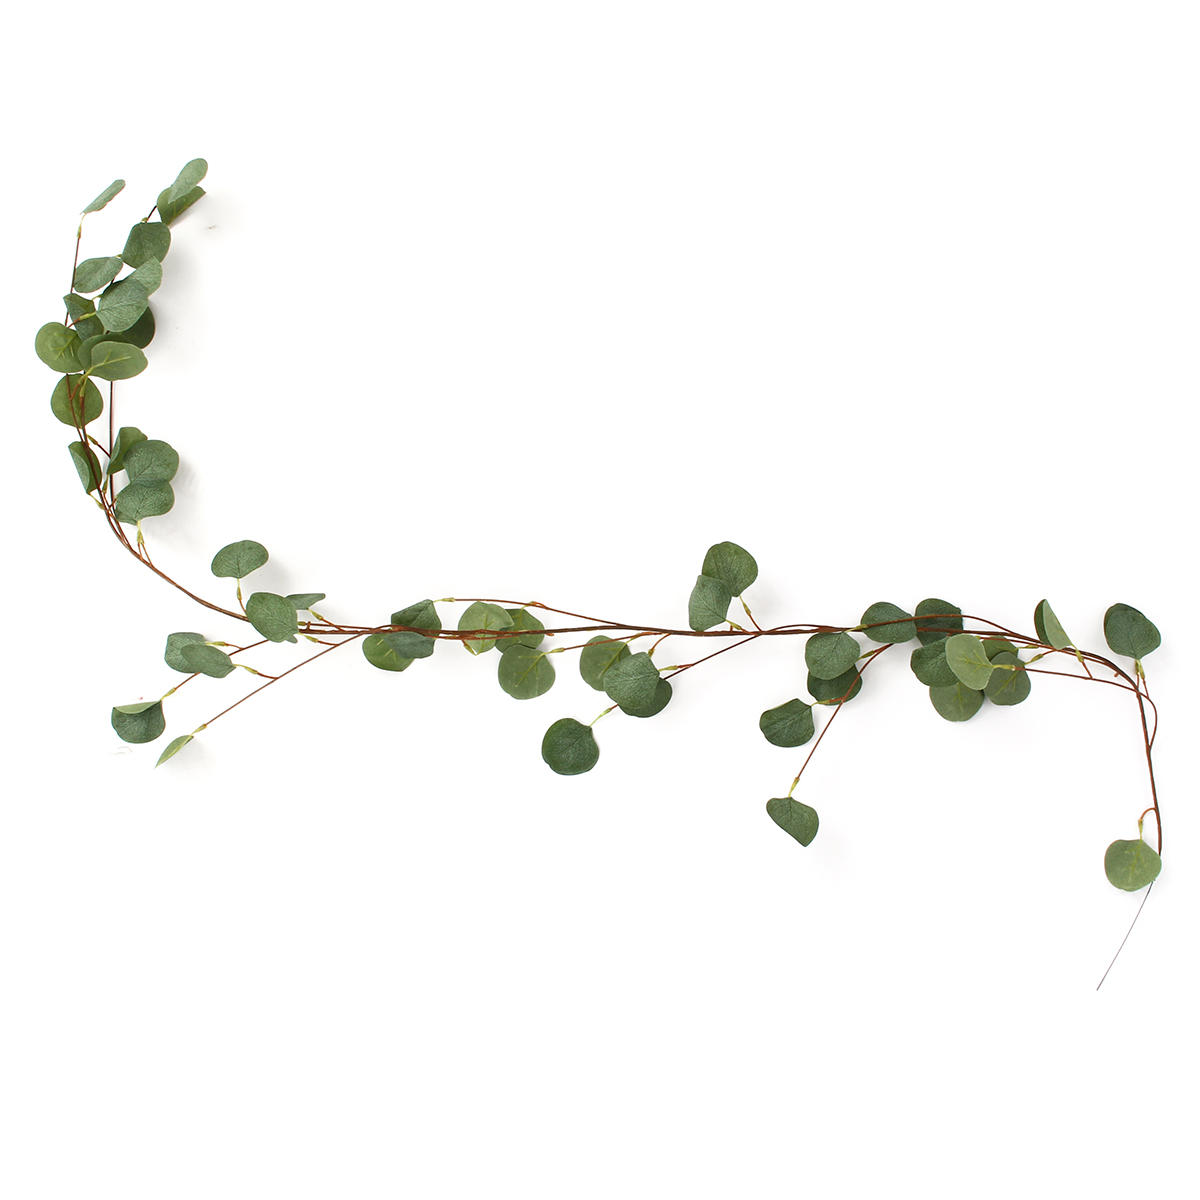 1.7m Artificial Eucalyptus Leaves Garland Vine Wedding Greenery for Home Wall Decorations